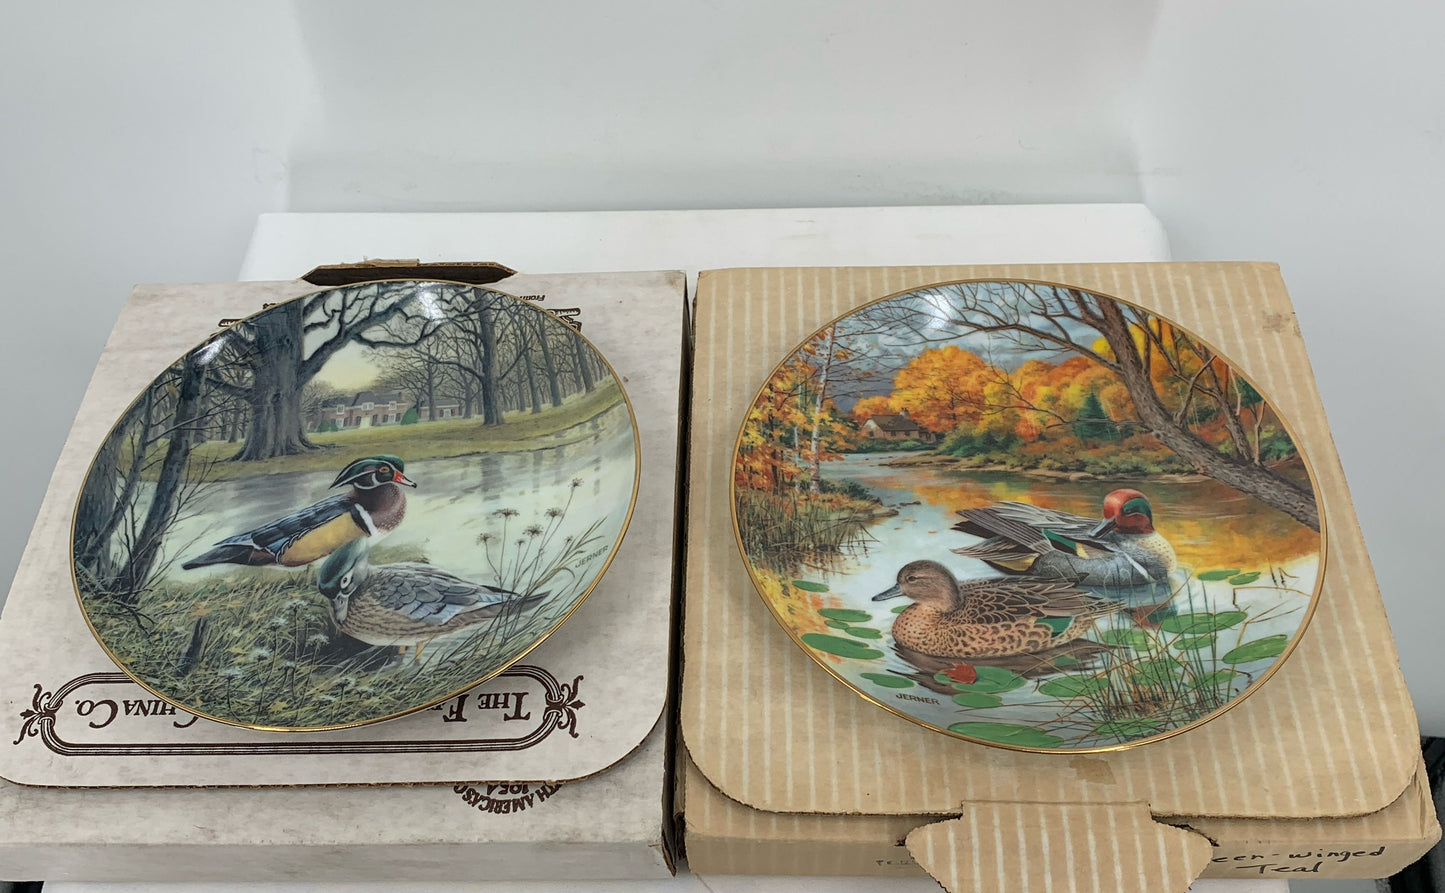 Vintage Jerner's Living With Nature Ducks Collection 3rd & 4th Issue Plates